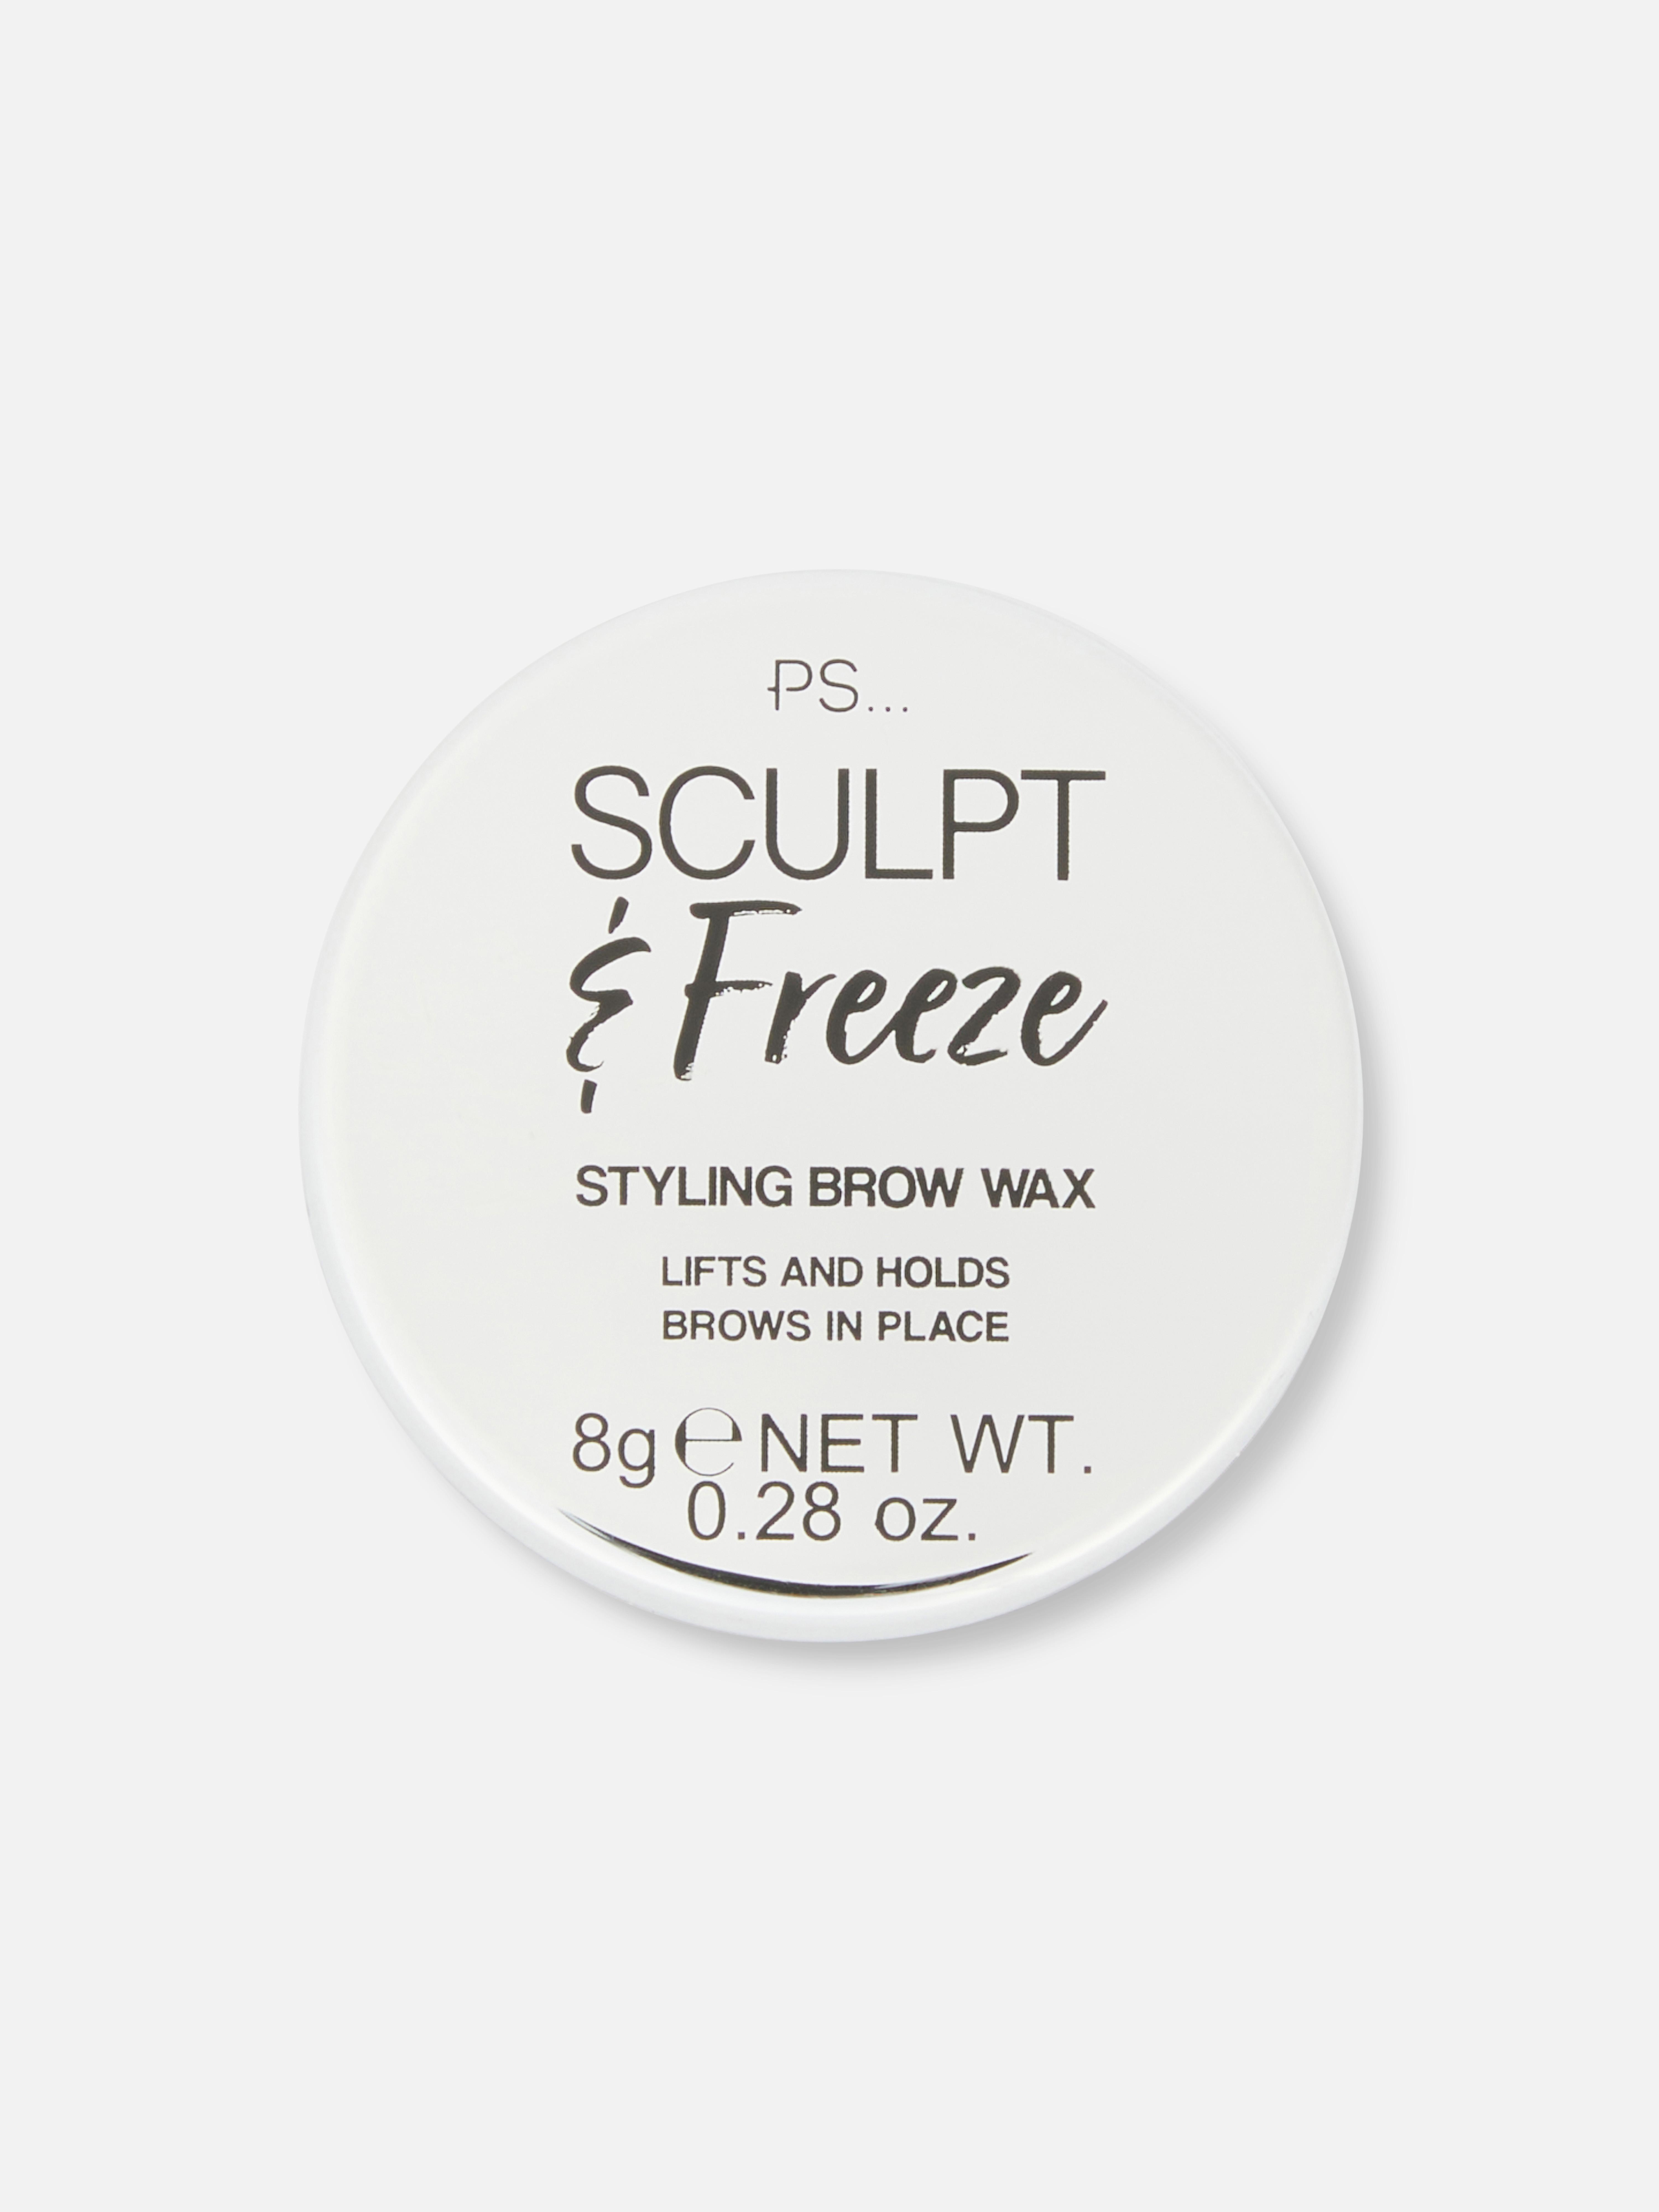 PS Sculpt and Freeze Styling Brow Wax